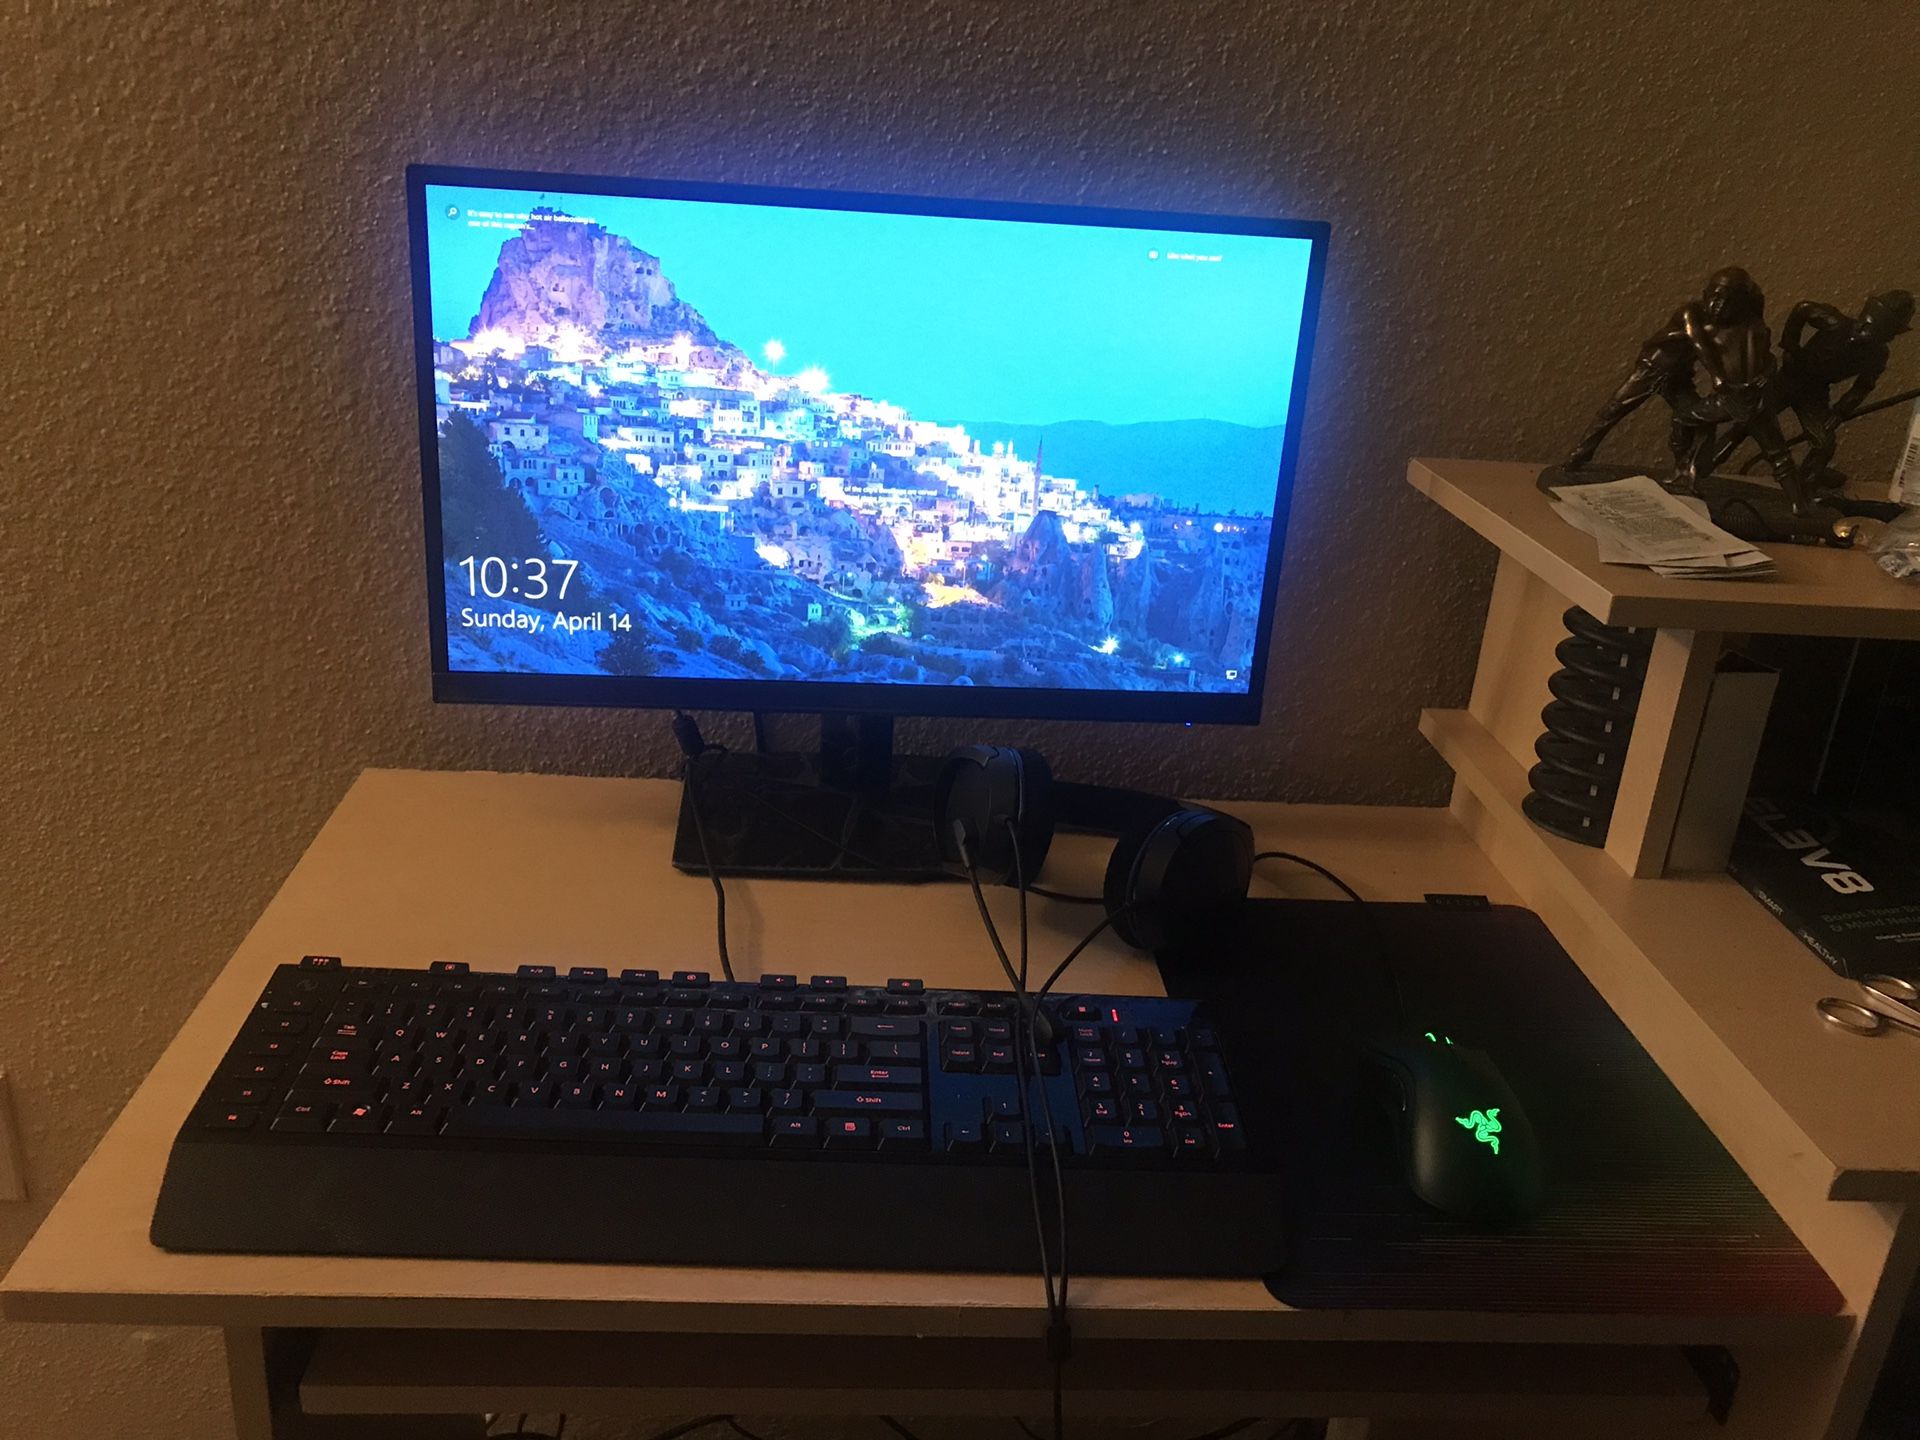 Gaming PC brand new with 1070ti GPU! I just recently has built it a new Gamin PC! Forntine fps 200, csgo fps 100, pubg fps 130-200